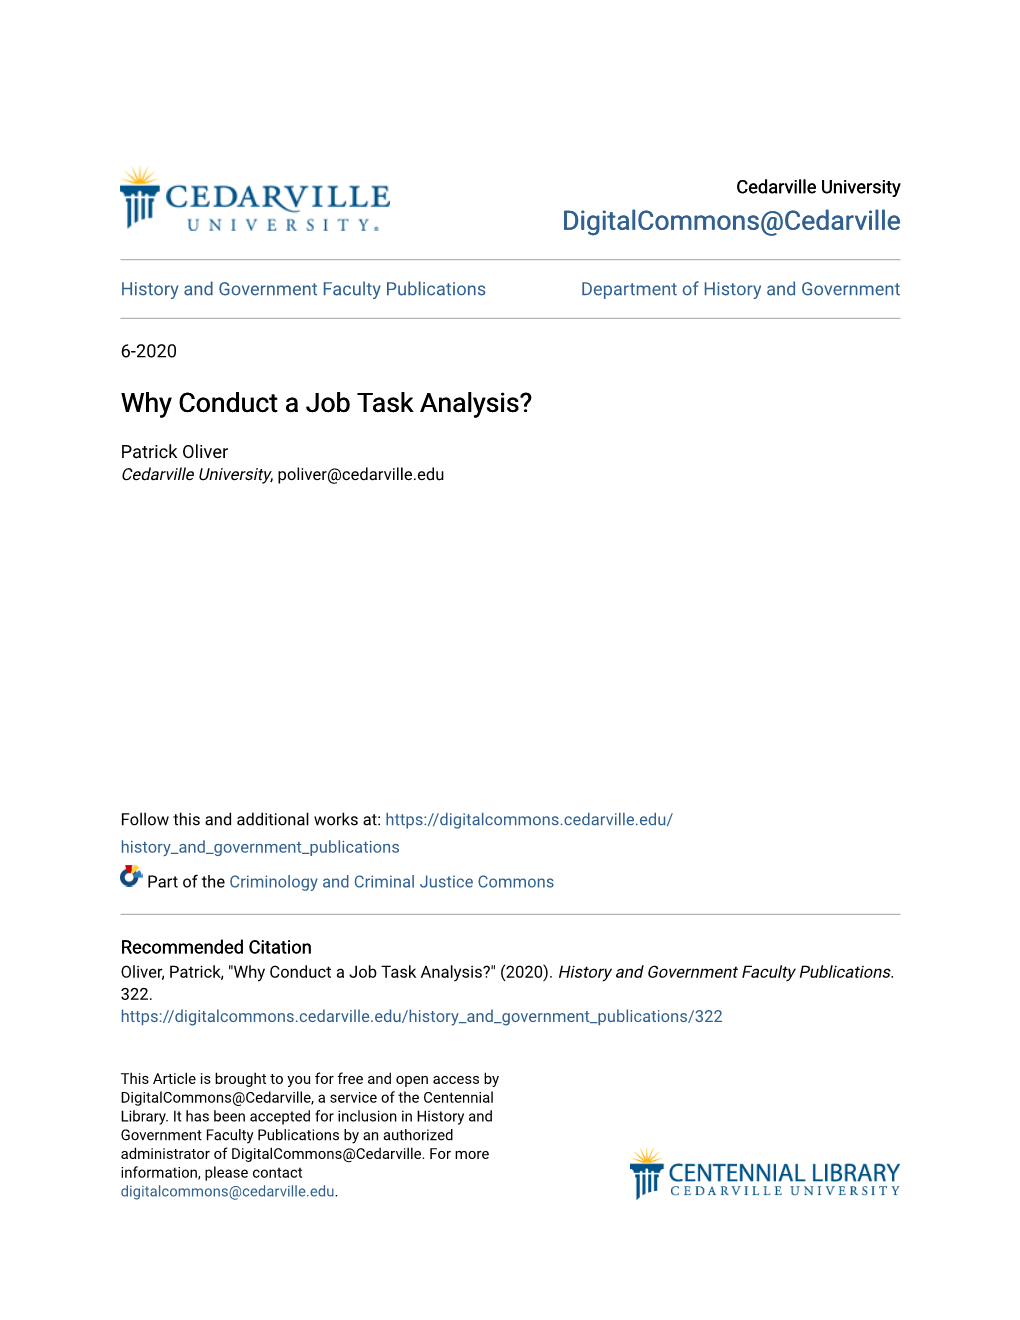 Why Conduct a Job Task Analysis?